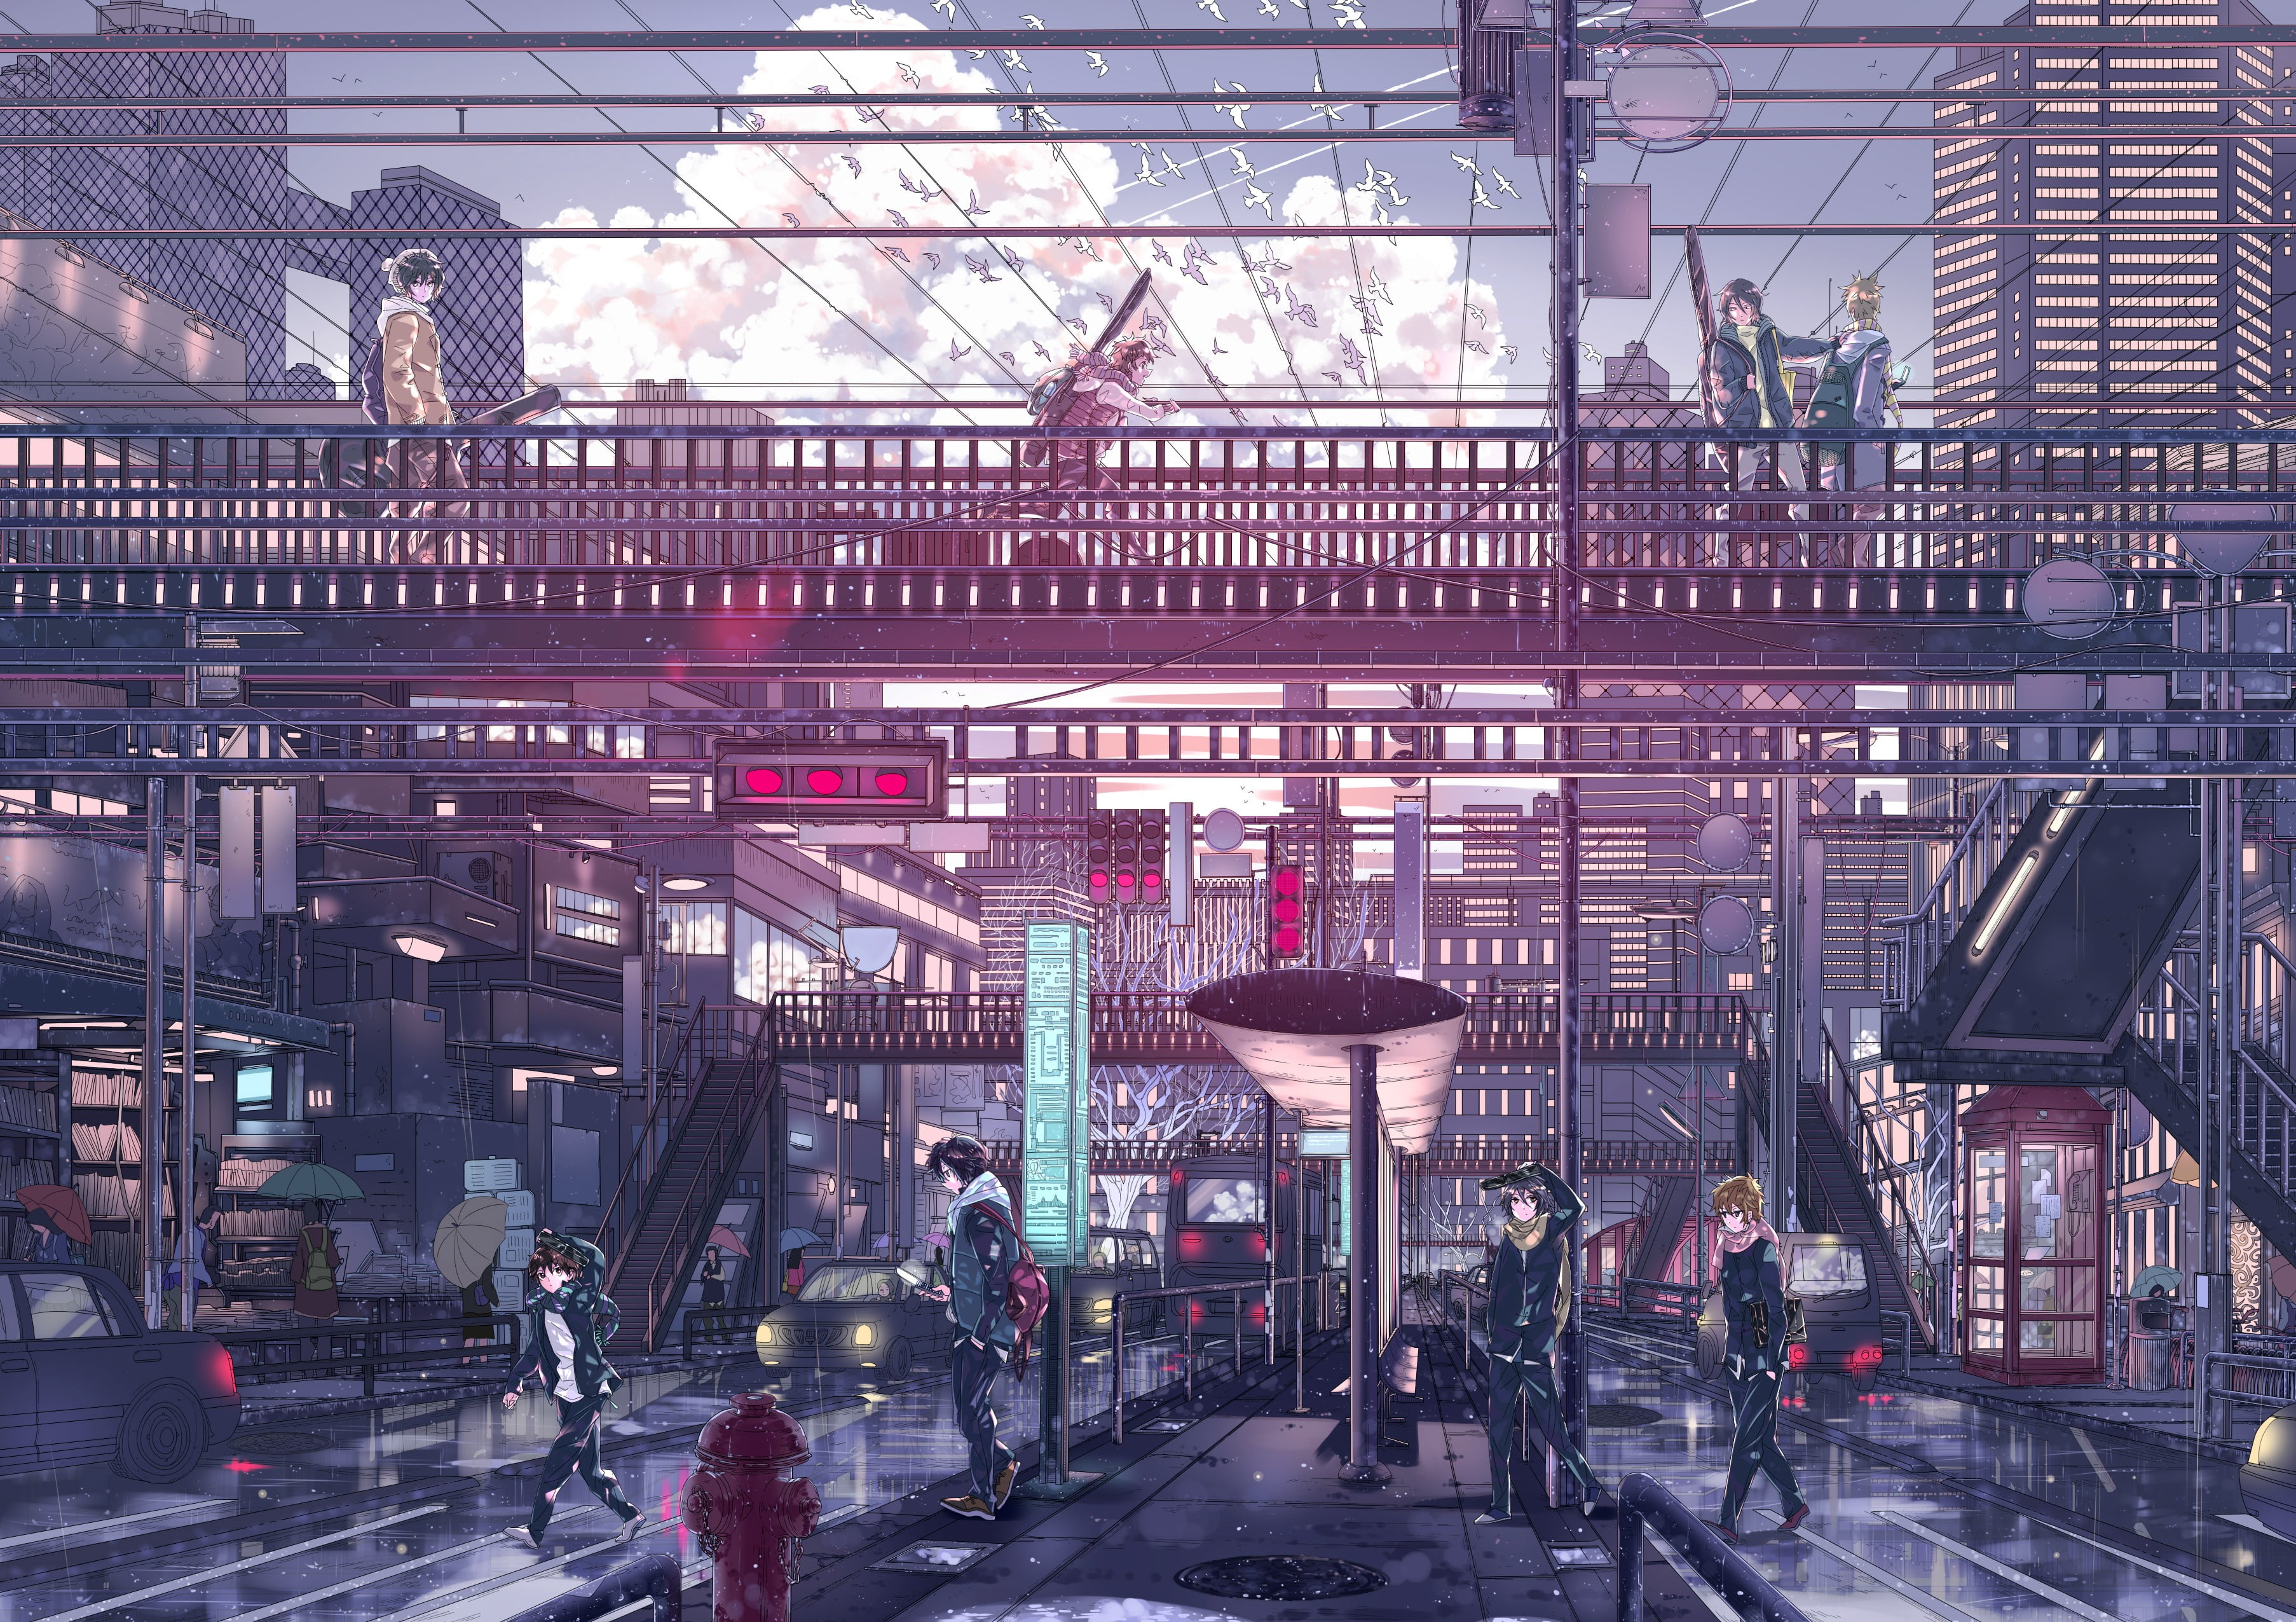 Anime Train Station HD Wallpaper by studio-outline